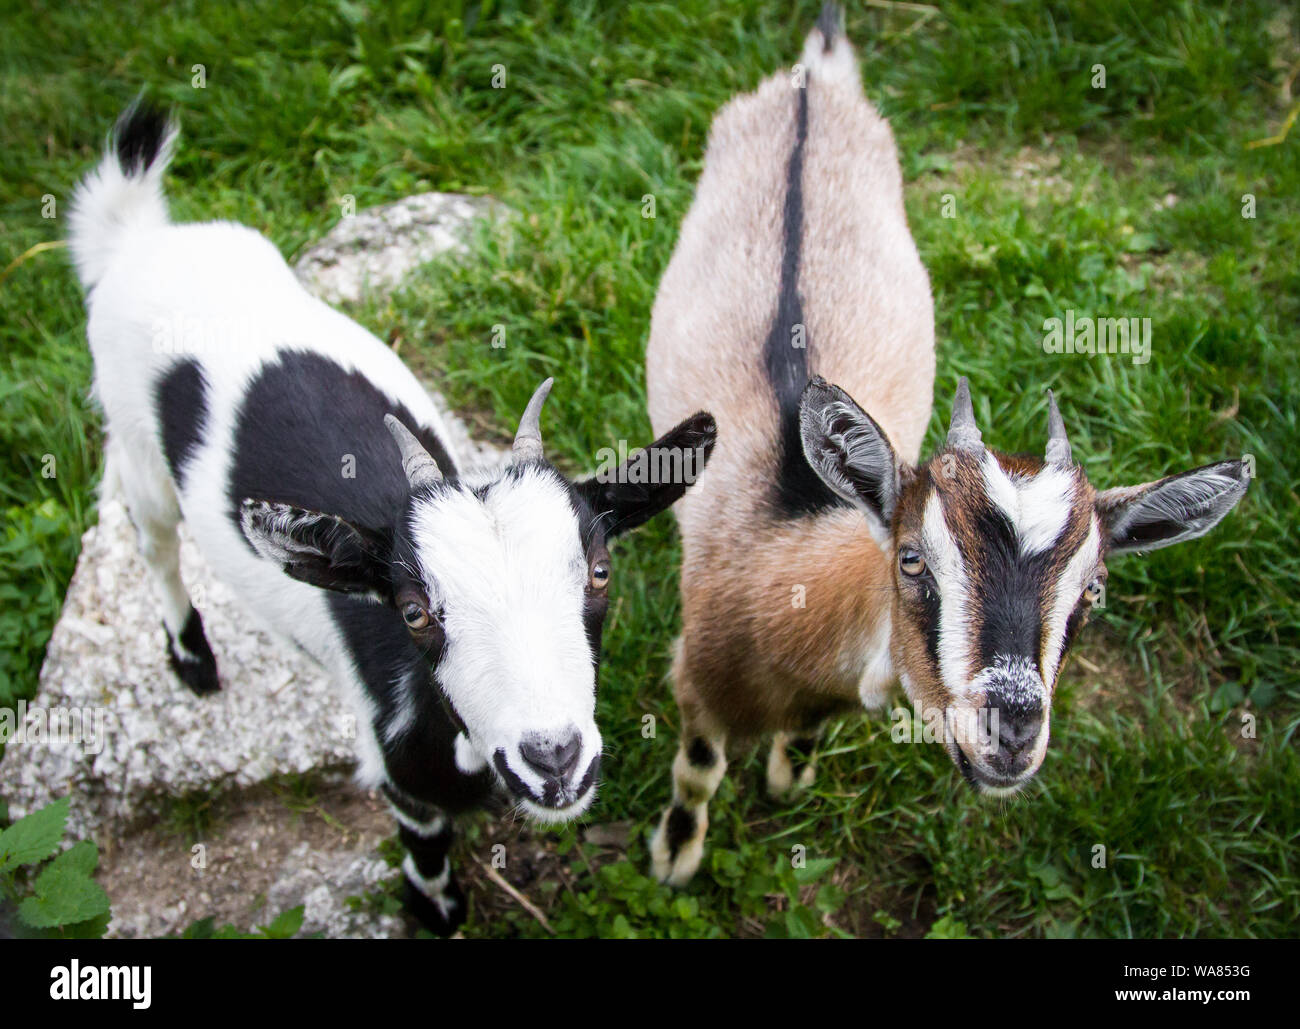 Two young nosy dwarf goats looking into the camera Stock Photo